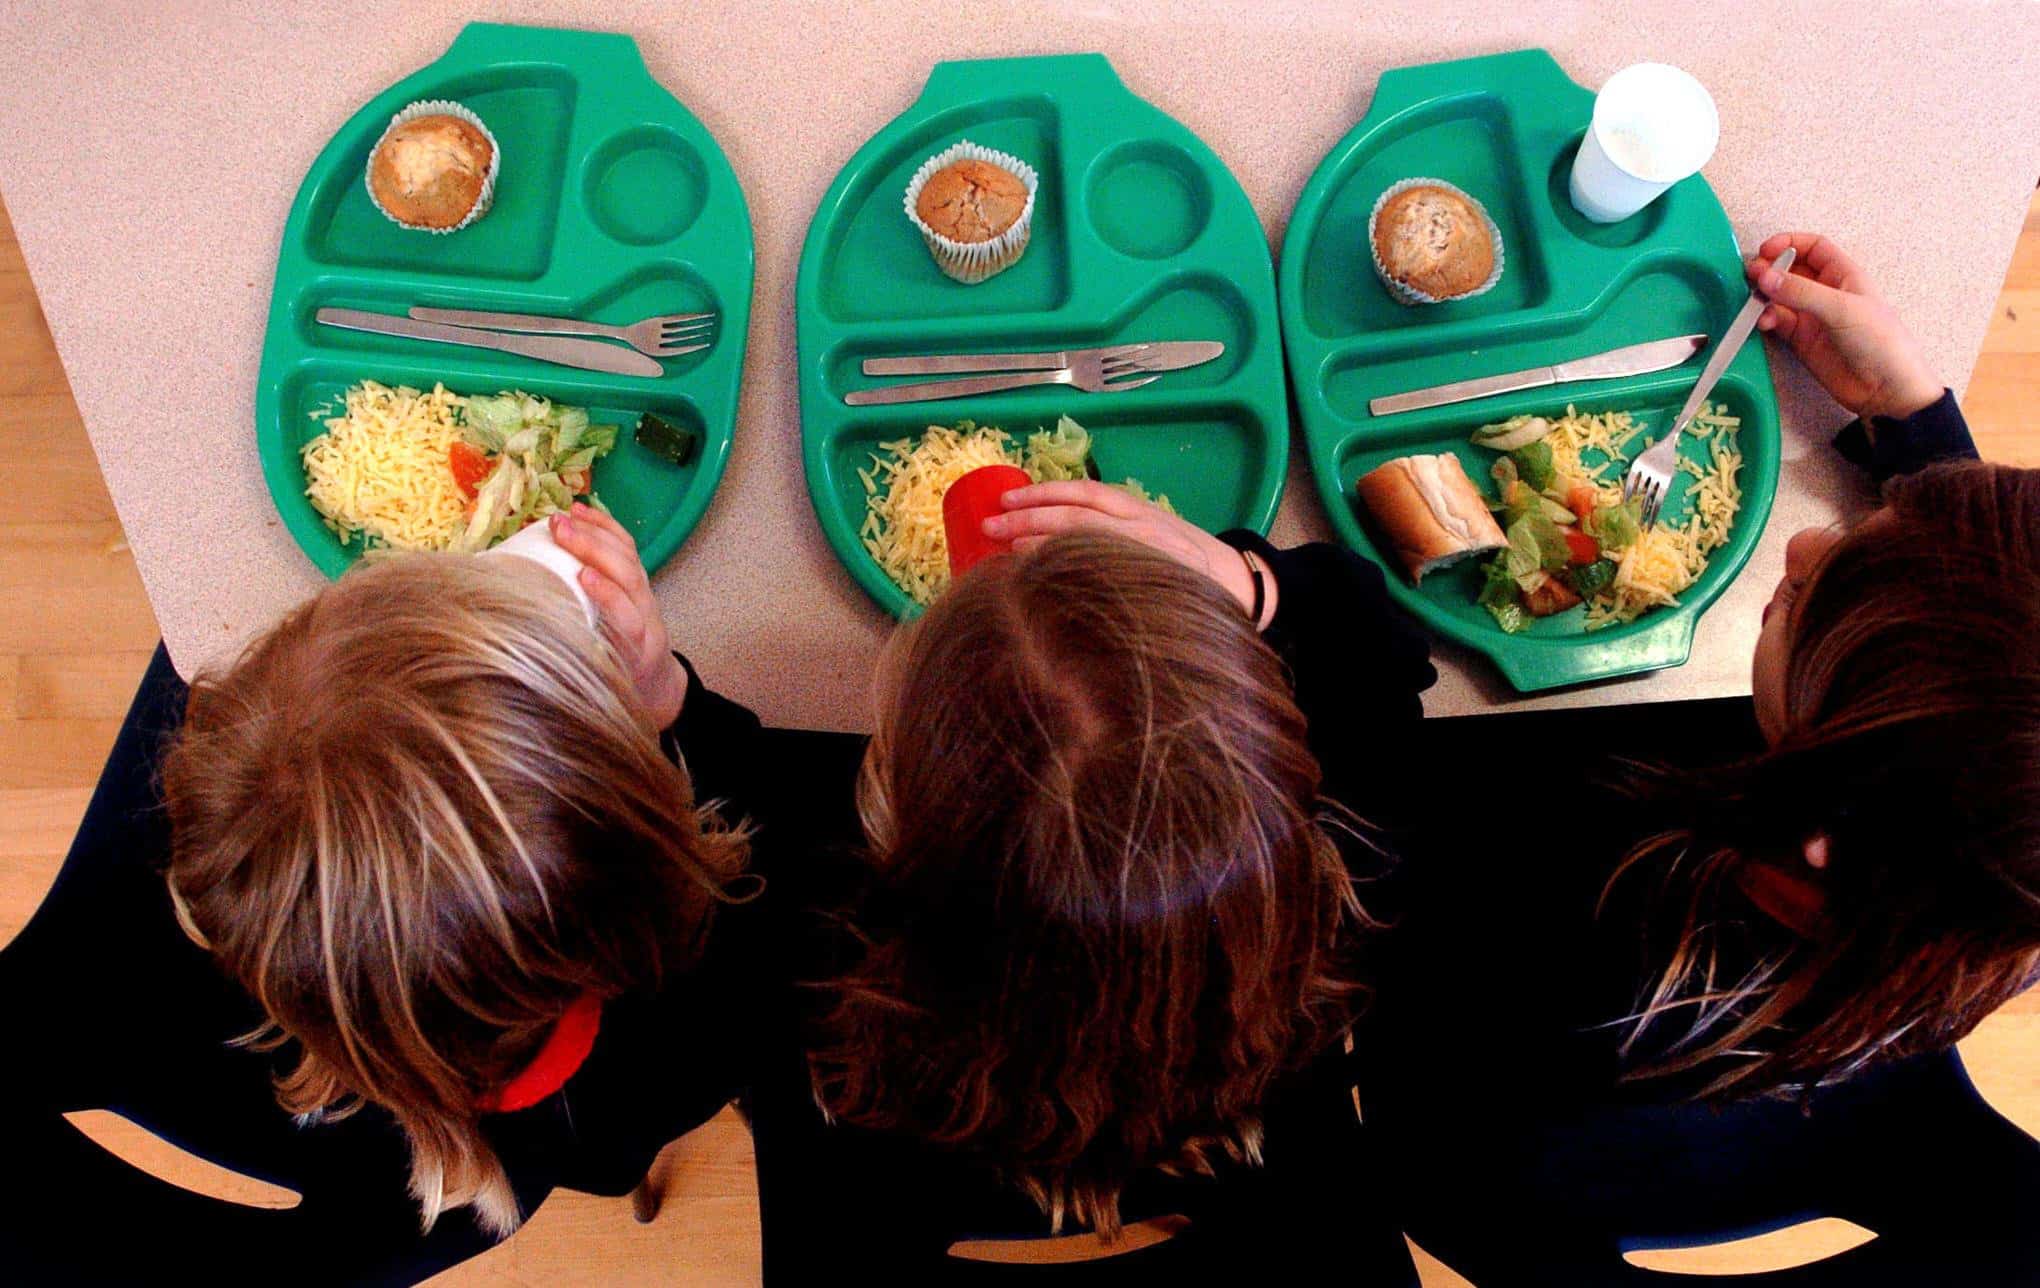 One in four teachers forced to give food to hungry children survey reveals